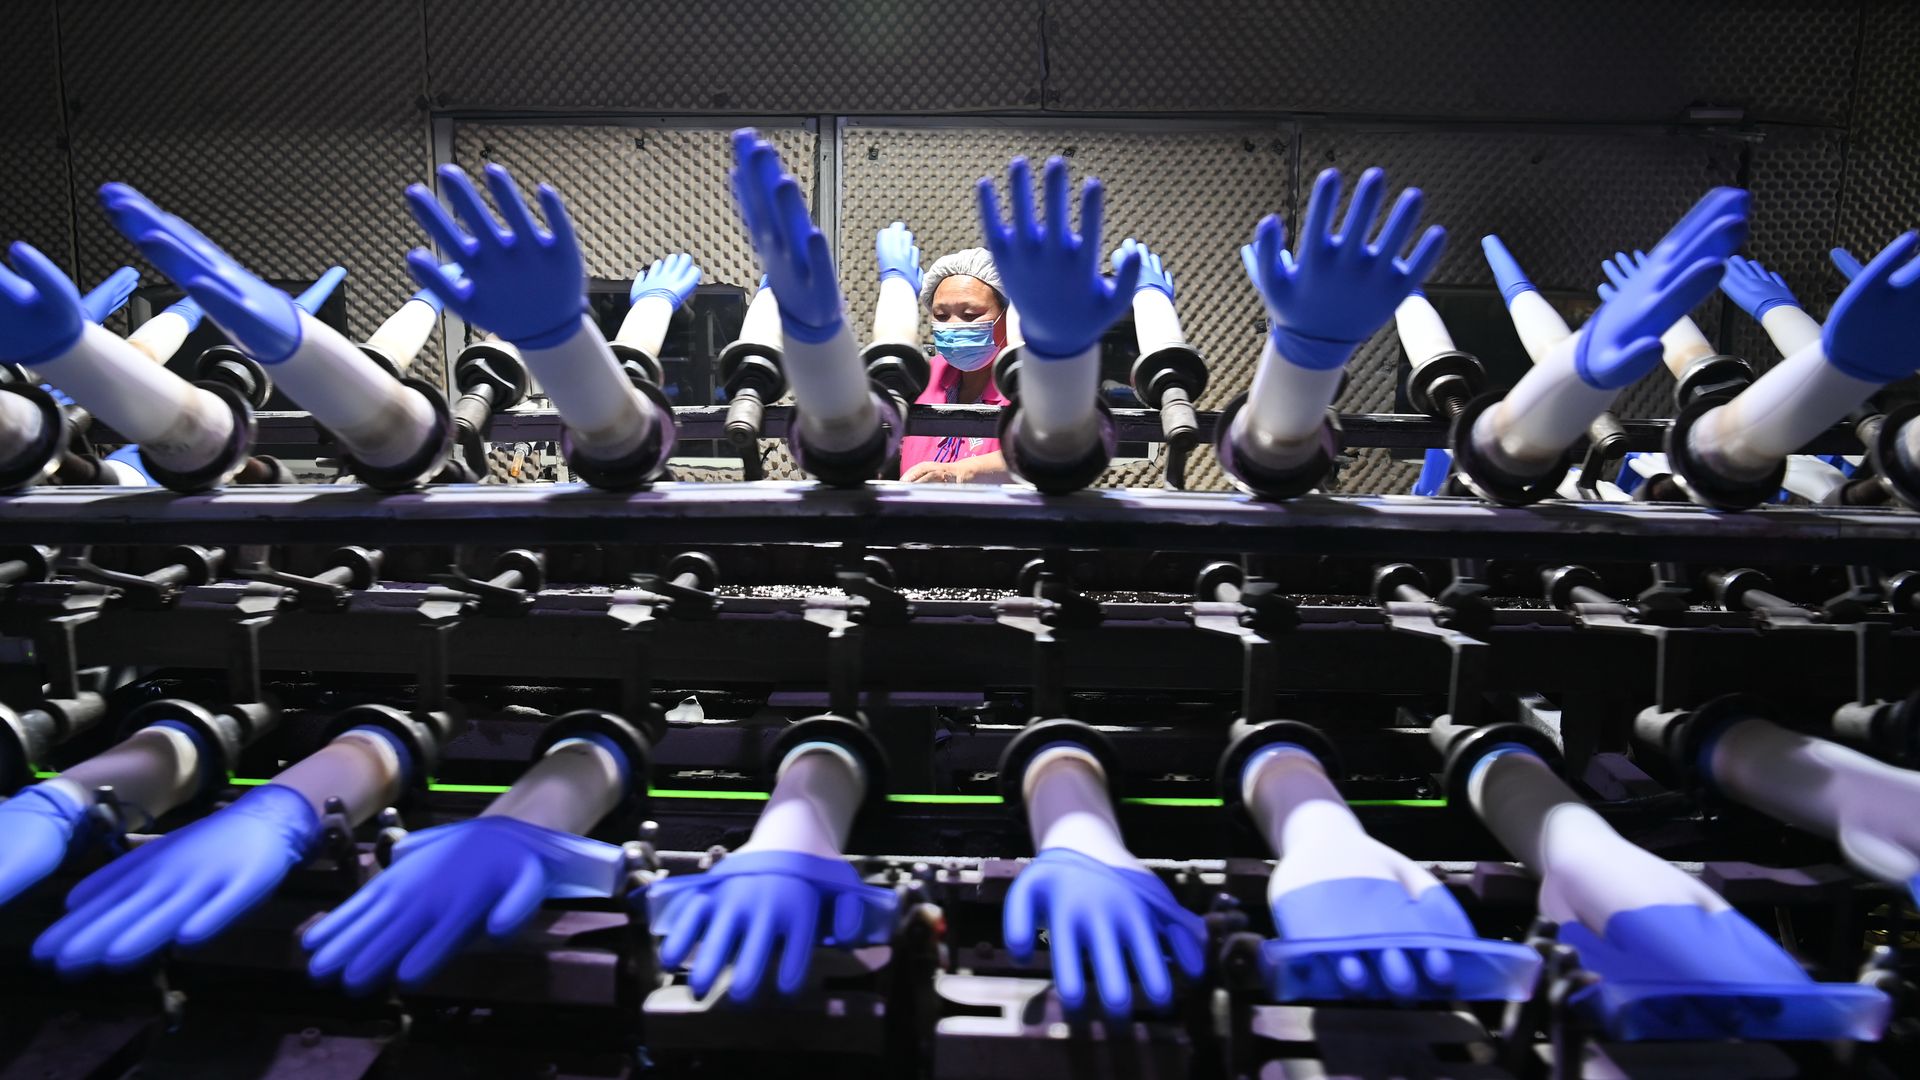 Rows of blue nitrile medical gloves in a manufacturing plant.